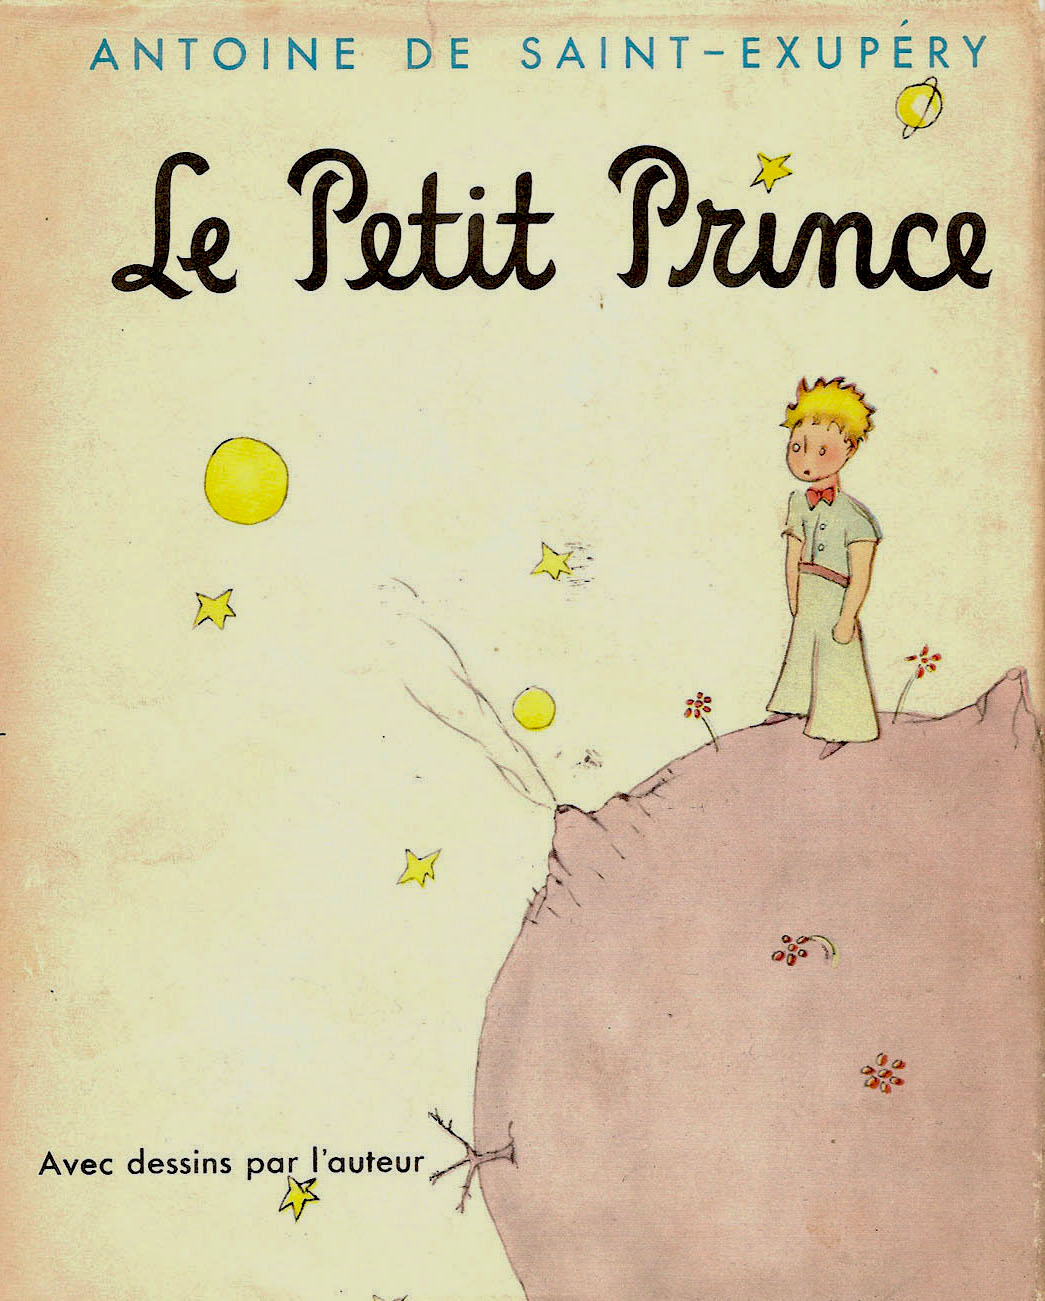 12 Charming Facts About The Little Prince